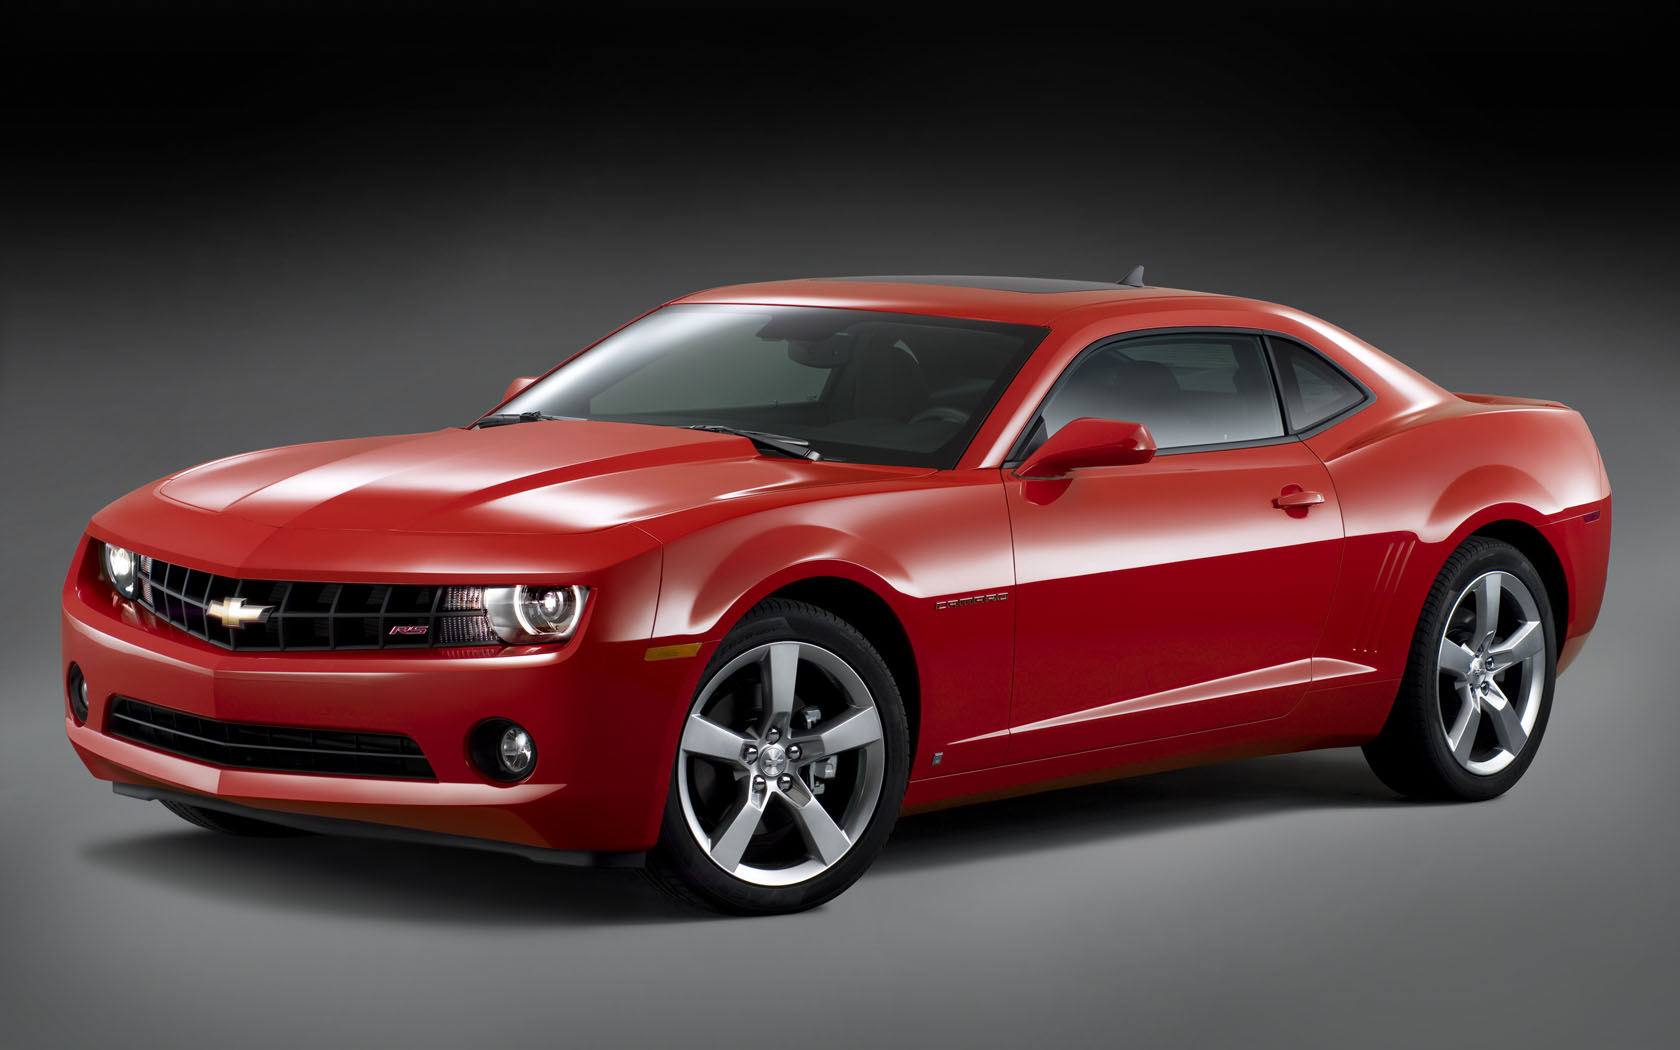 Red Chevy Camaro Wallpaper 4128 Hd Wallpapers in Cars   Imagescicom 1680x1050